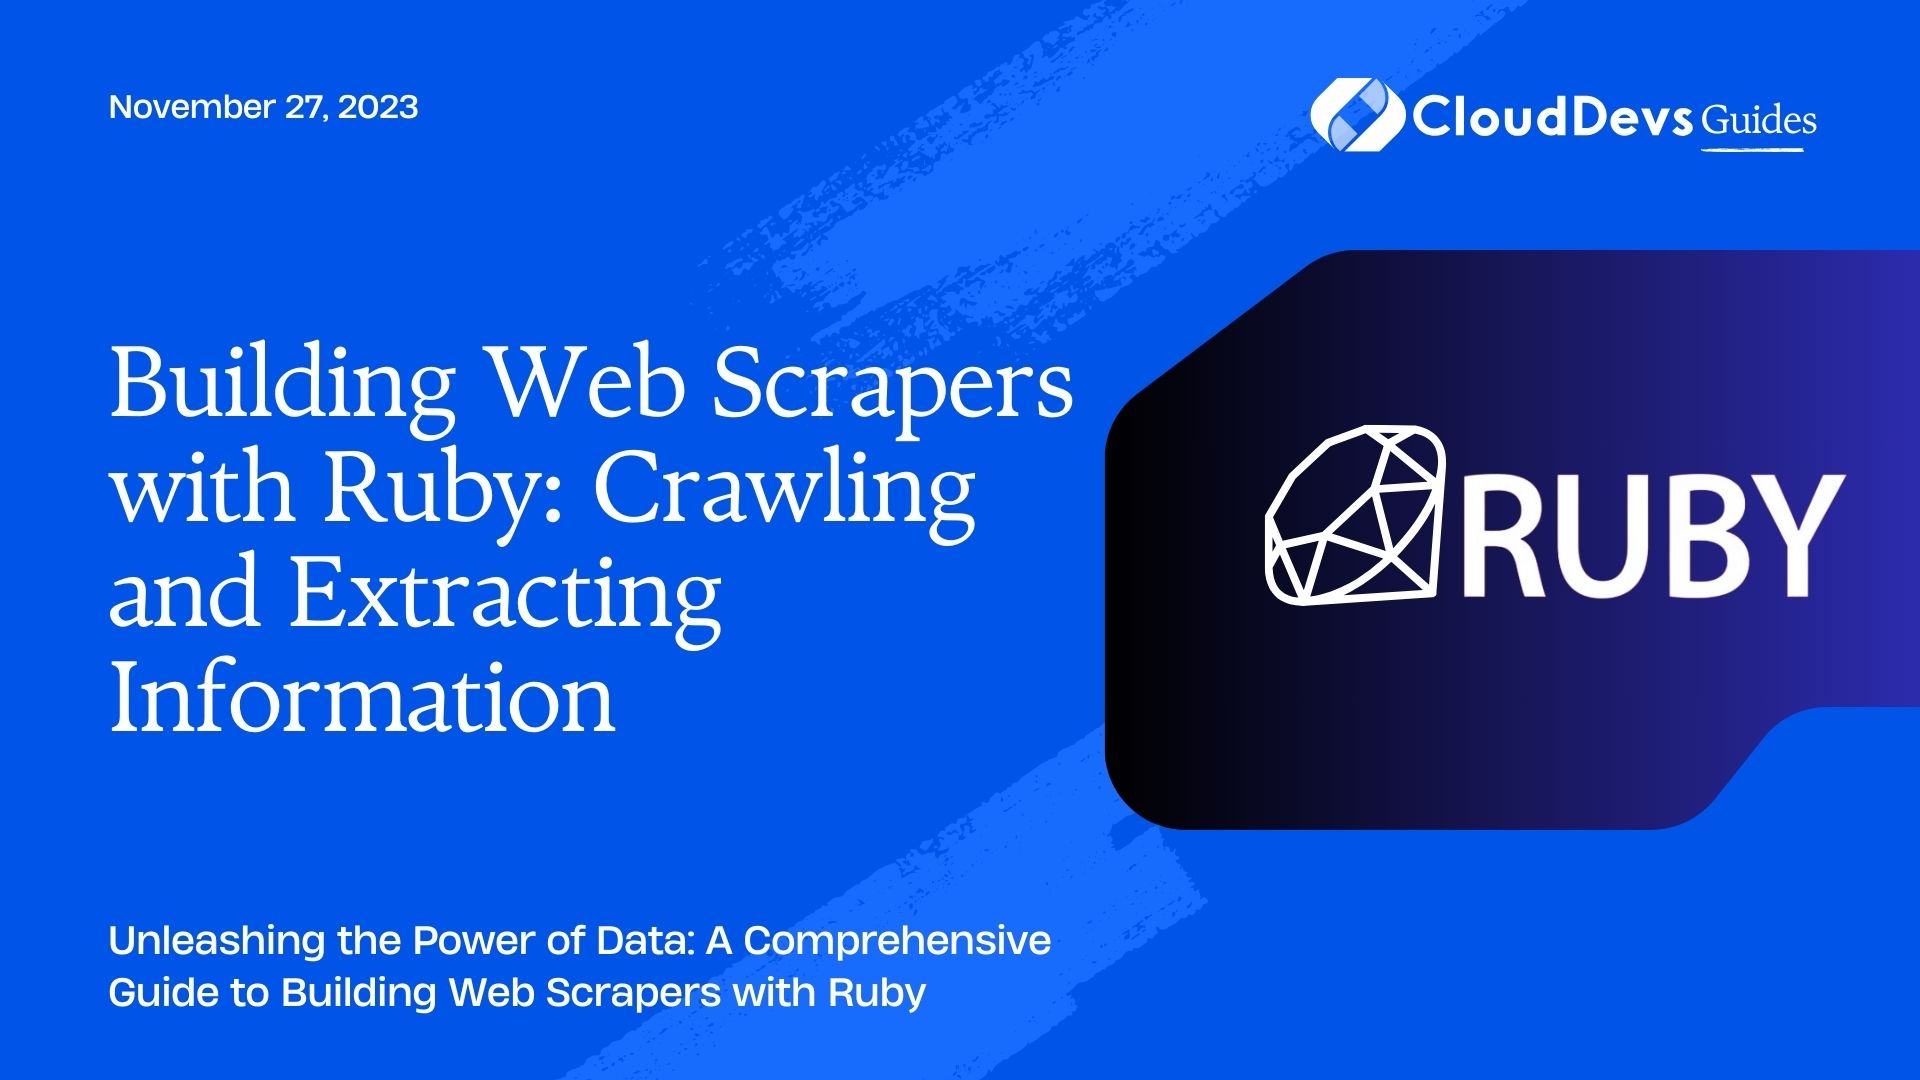 Building Web Scrapers with Ruby: Crawling and Extracting Information